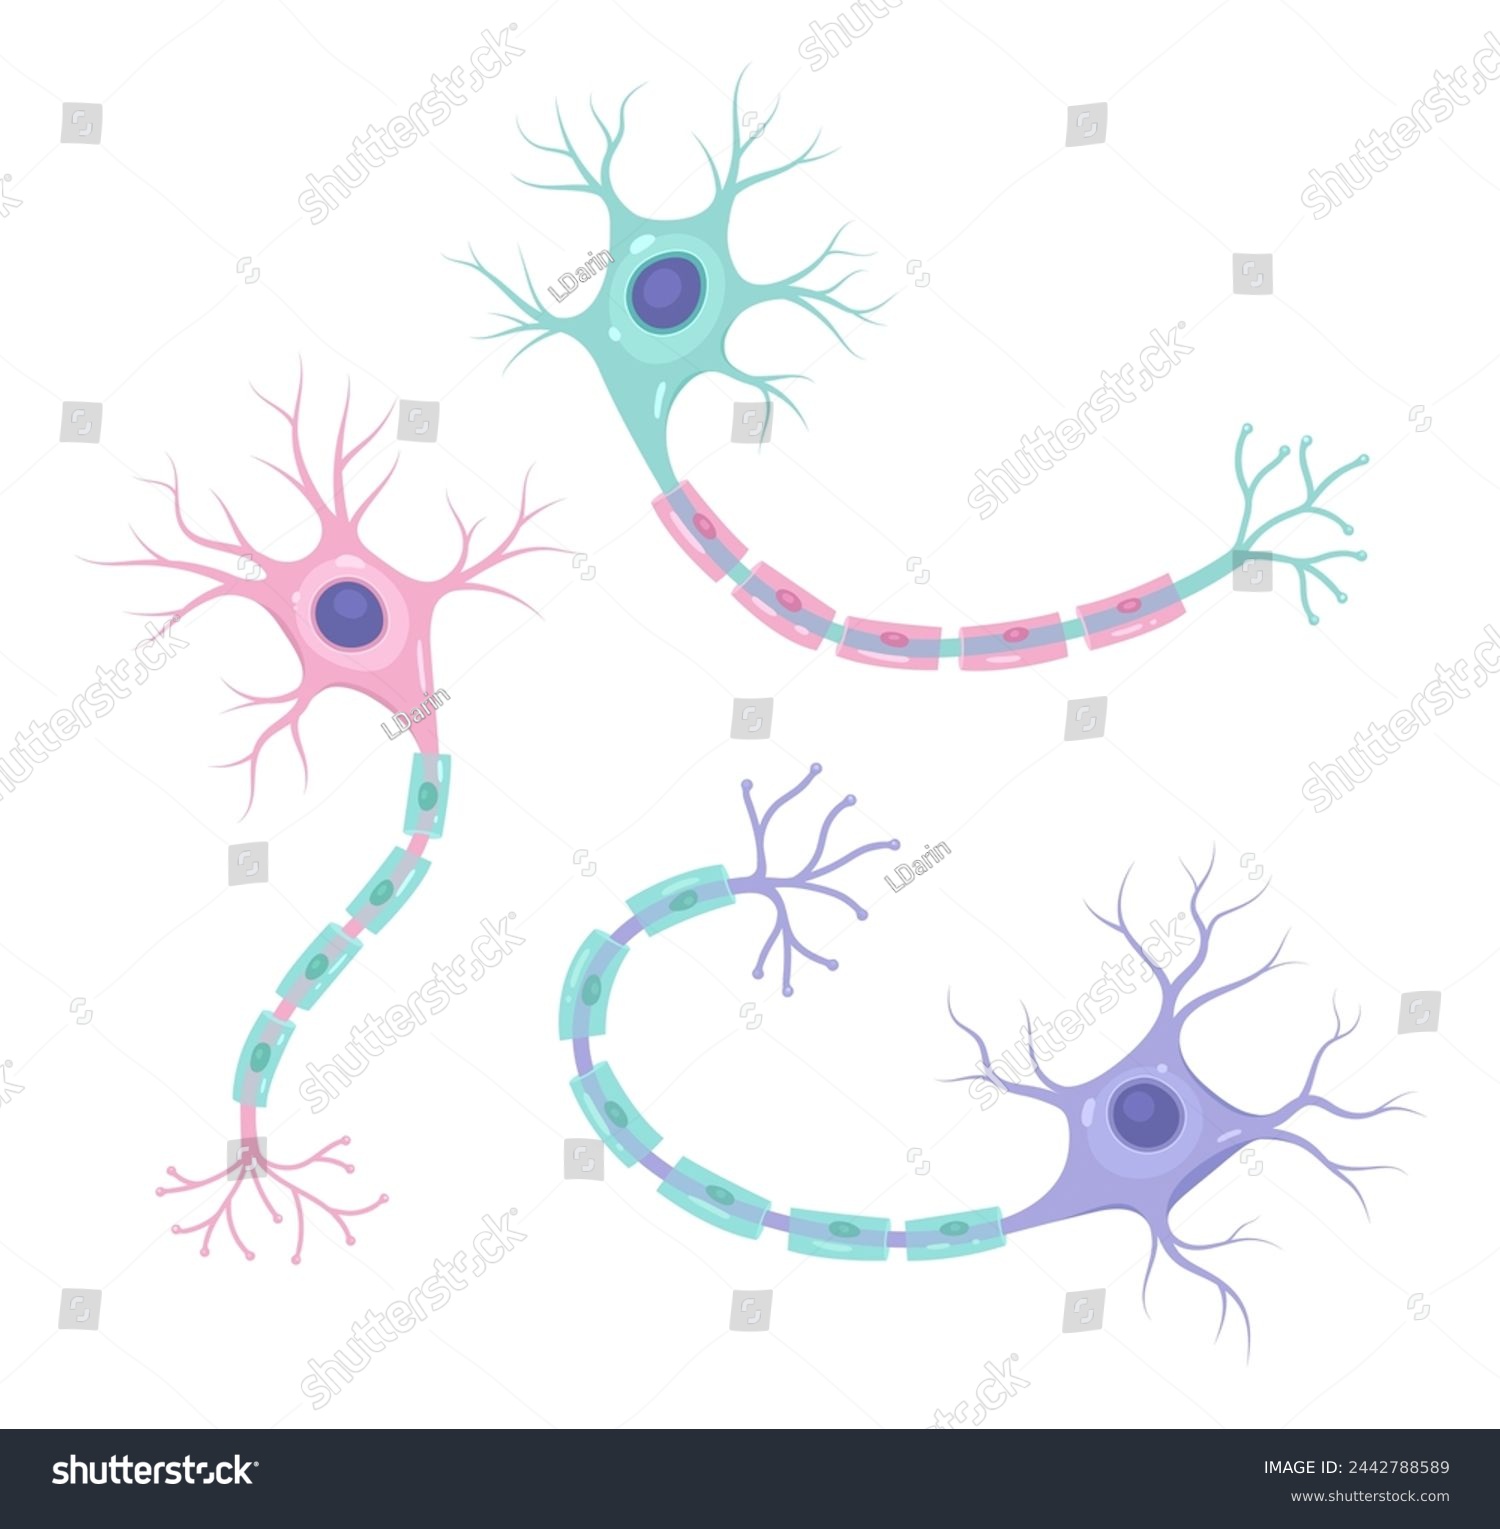 SVG of Vector set of neurons (nerve cell axon and myelin sheath svg